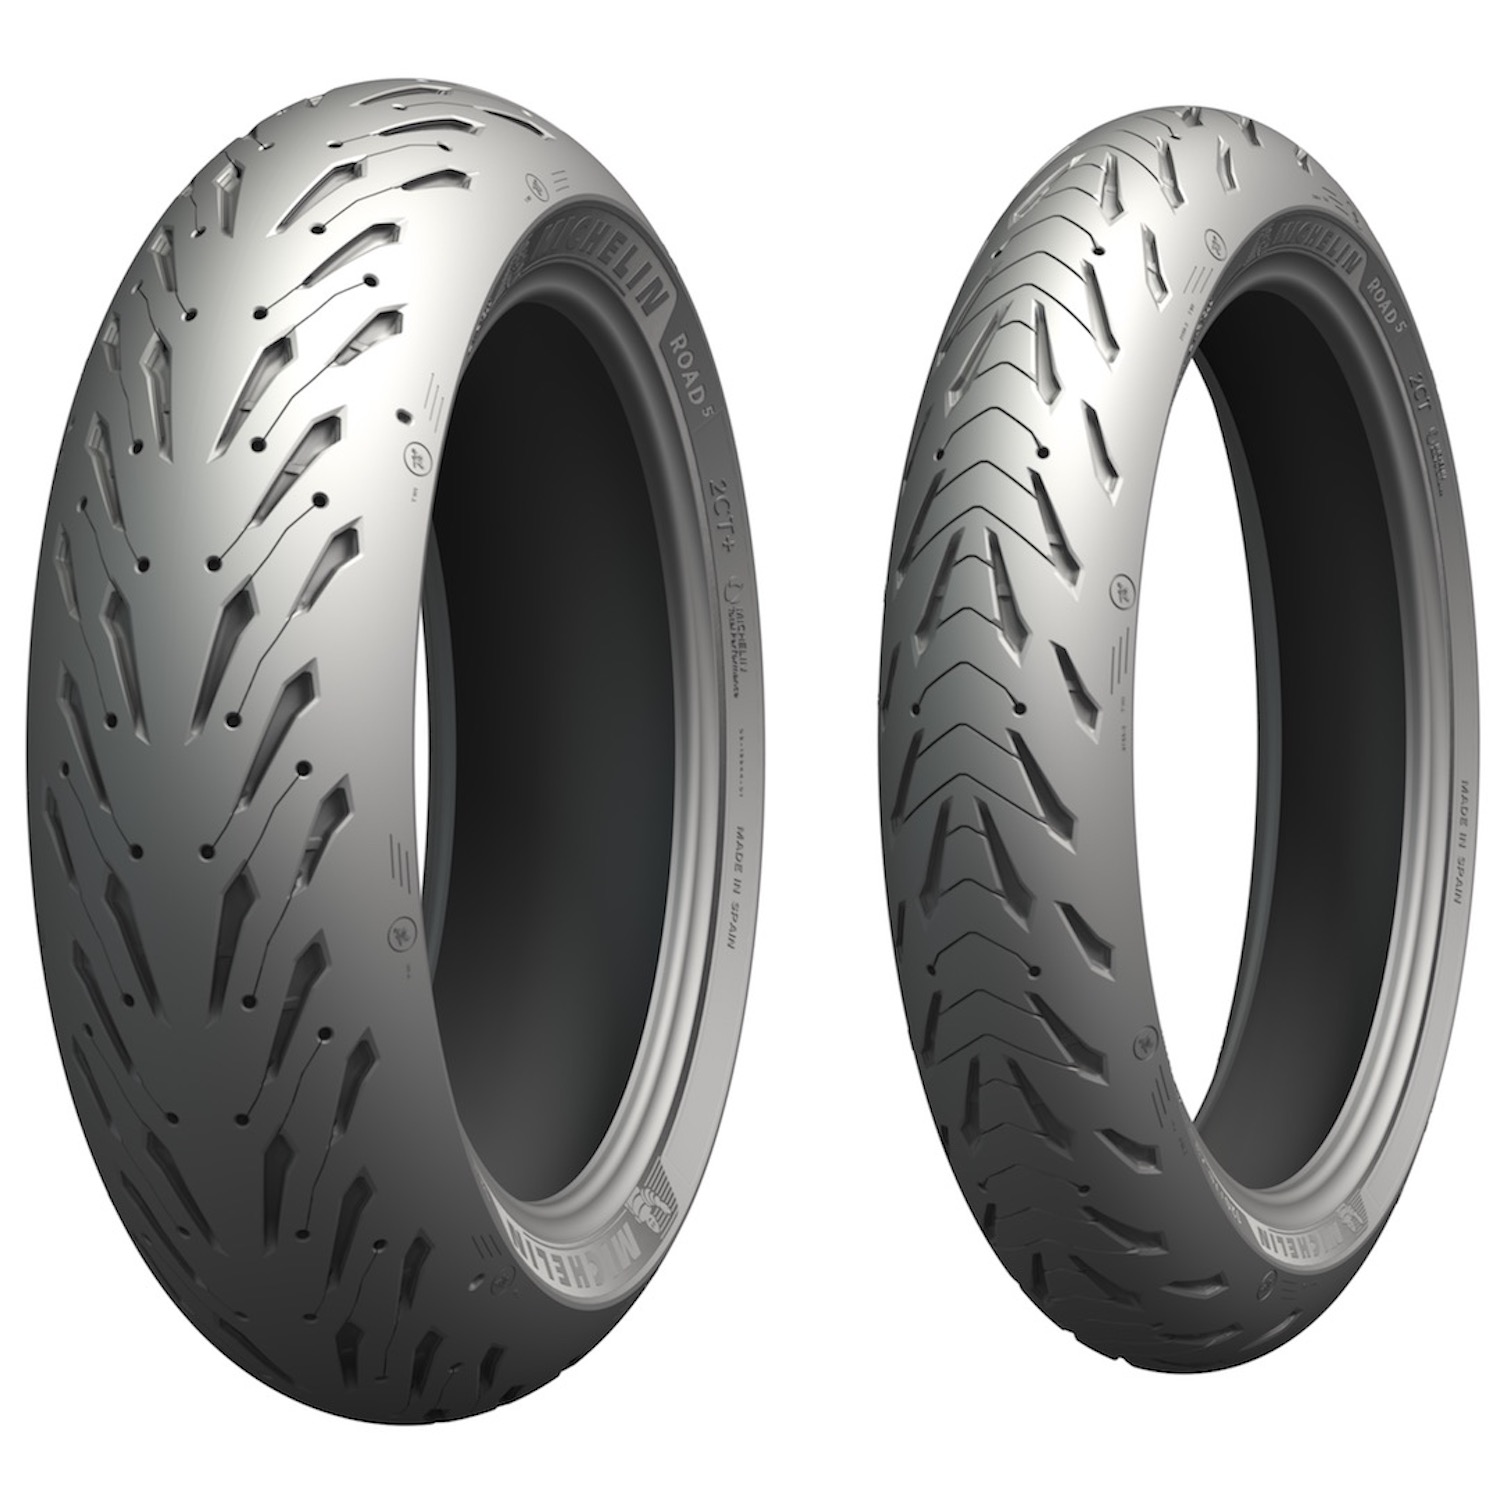 Michelin Road 5 tyres